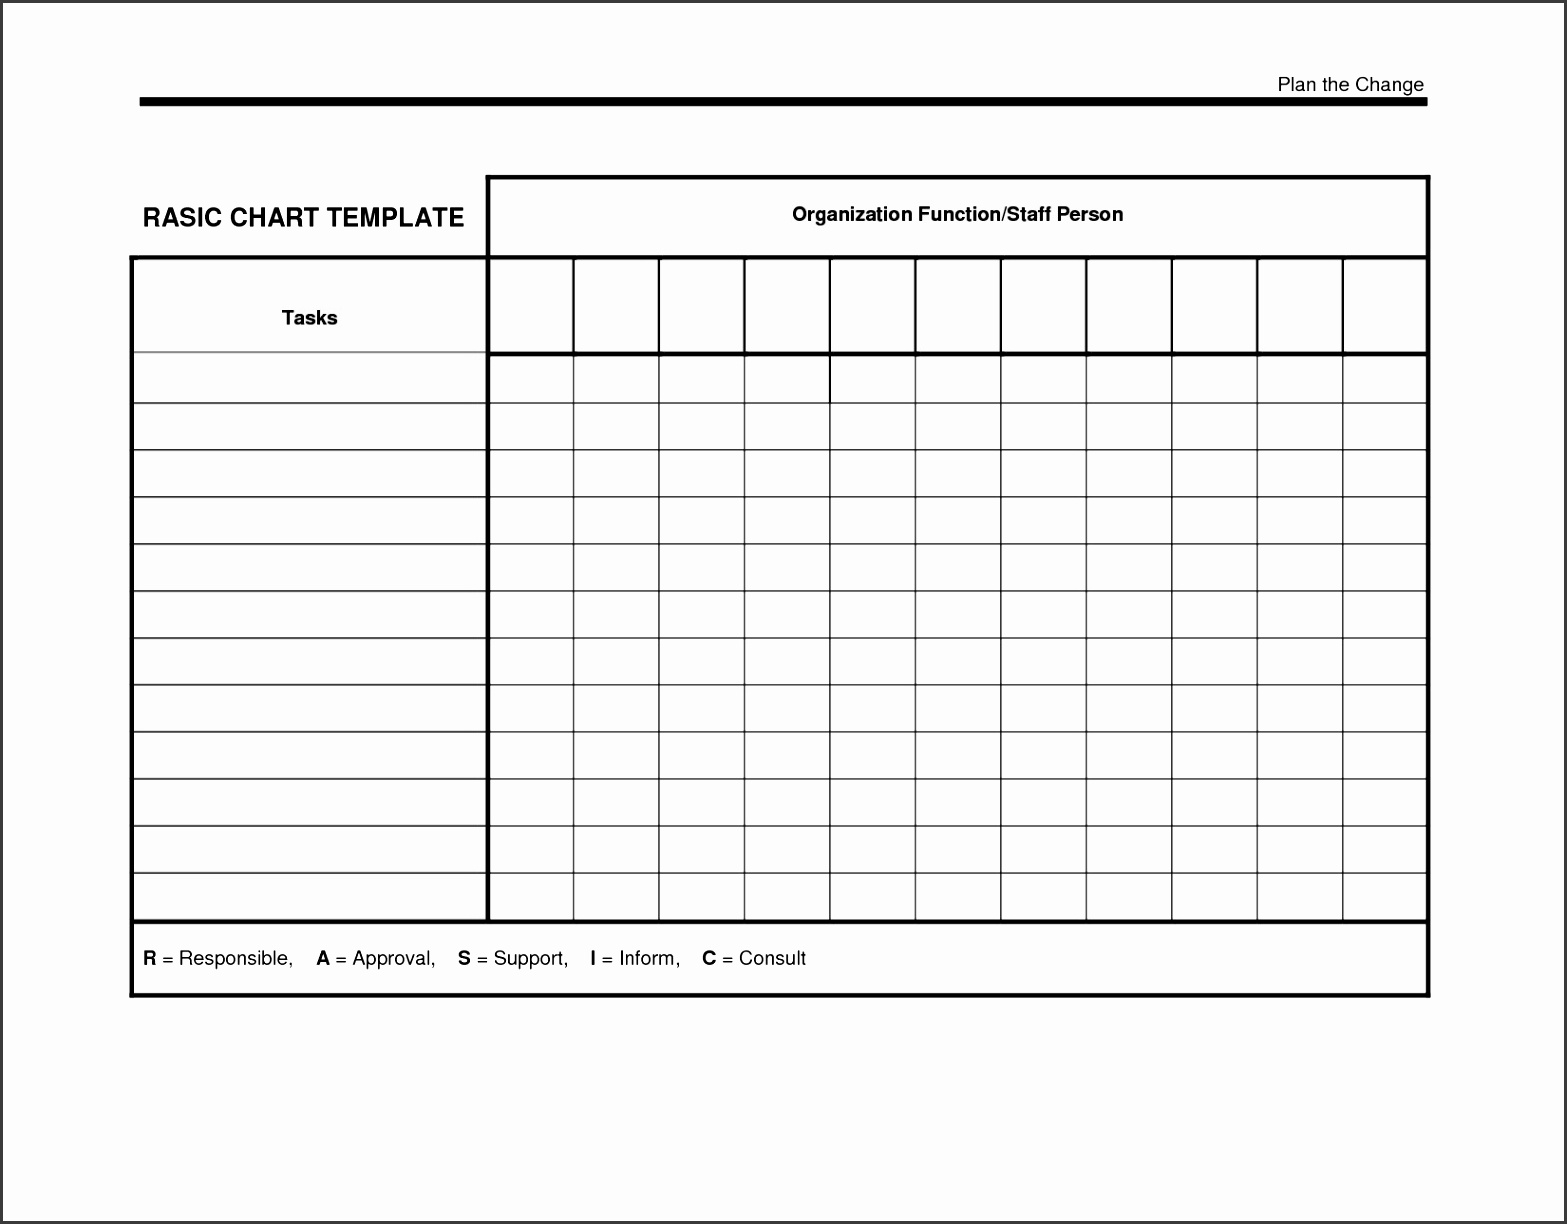 Chart Templates Free Targer golden Dragon pertaining to Blank Chart Template